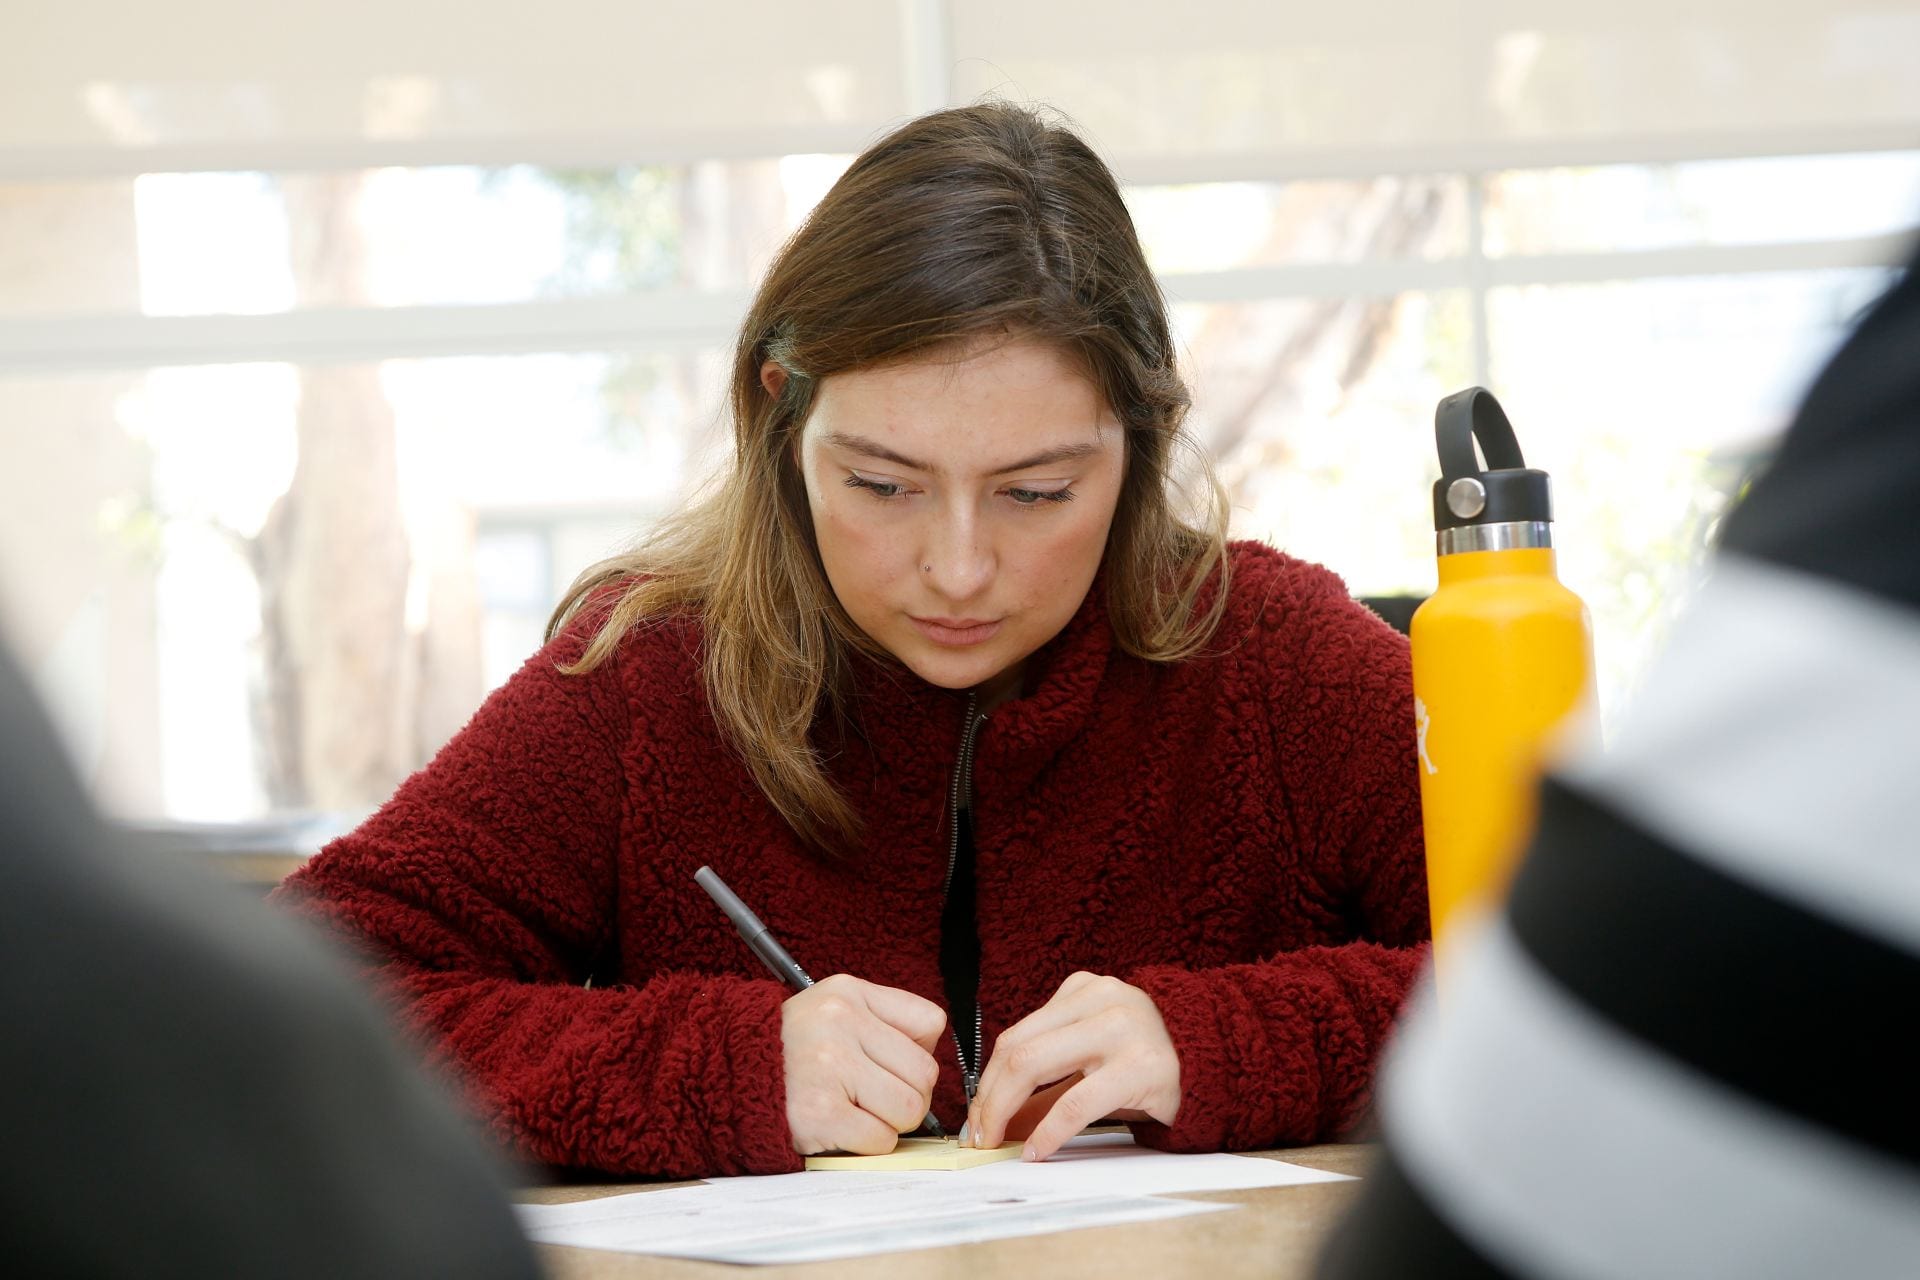 Lyzett Levenant, a senior biology major, participated in a focus group with Education Design Lab to help SJSU select two digital badges to pilot in the spring. ( Josie Lepe/San Jose State University )